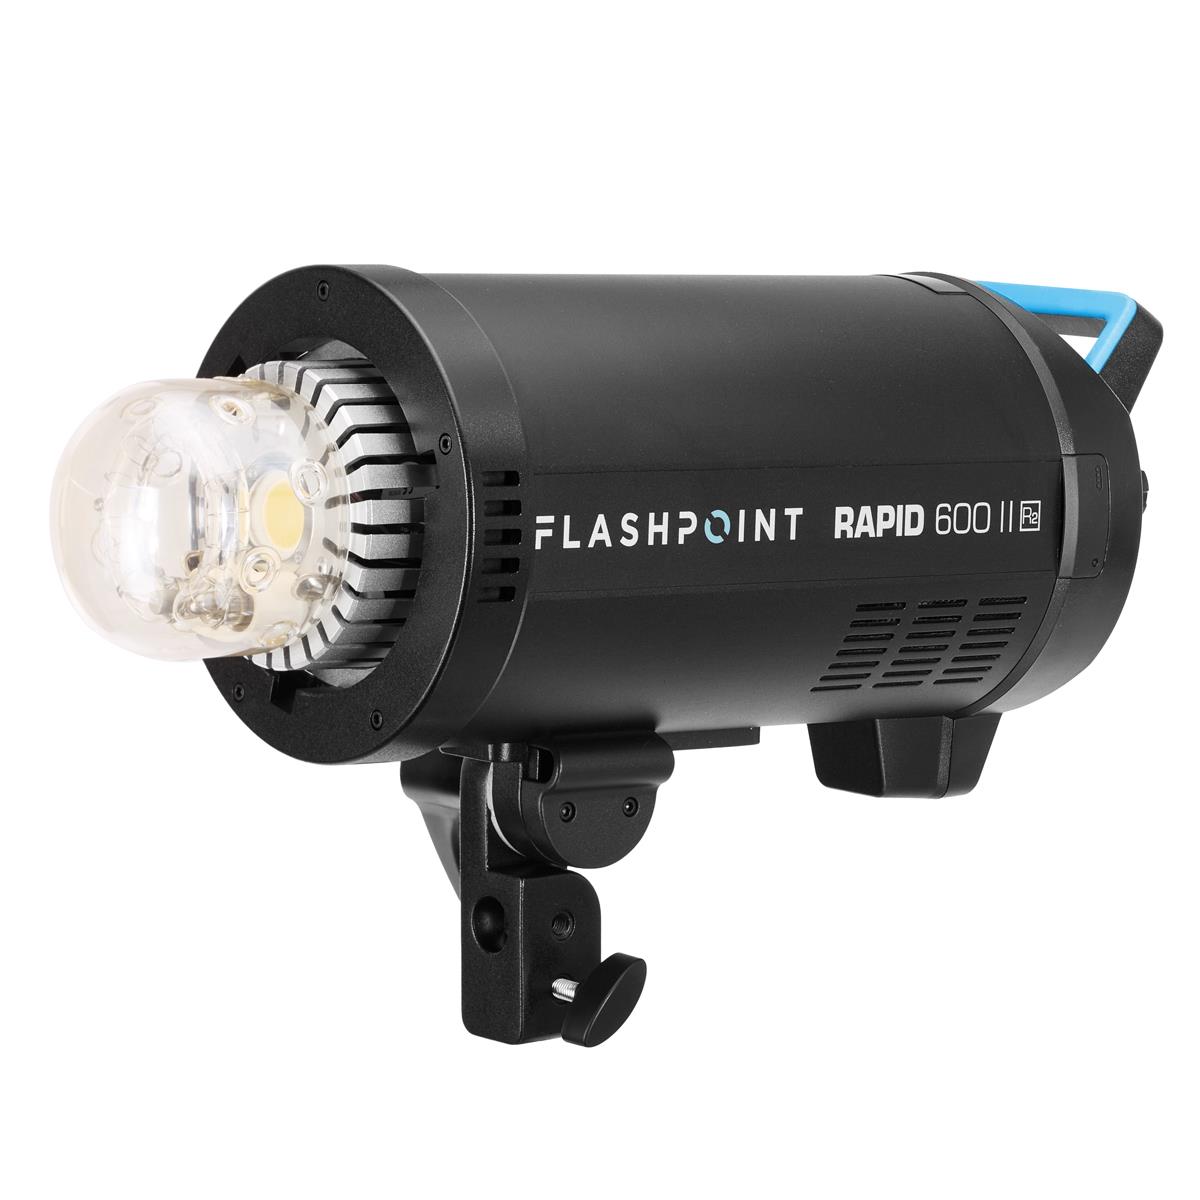 Image of Flashpoint Rapid 600 II HSS Monolight w/Built-In R2 2.4GHz Radio Remote System